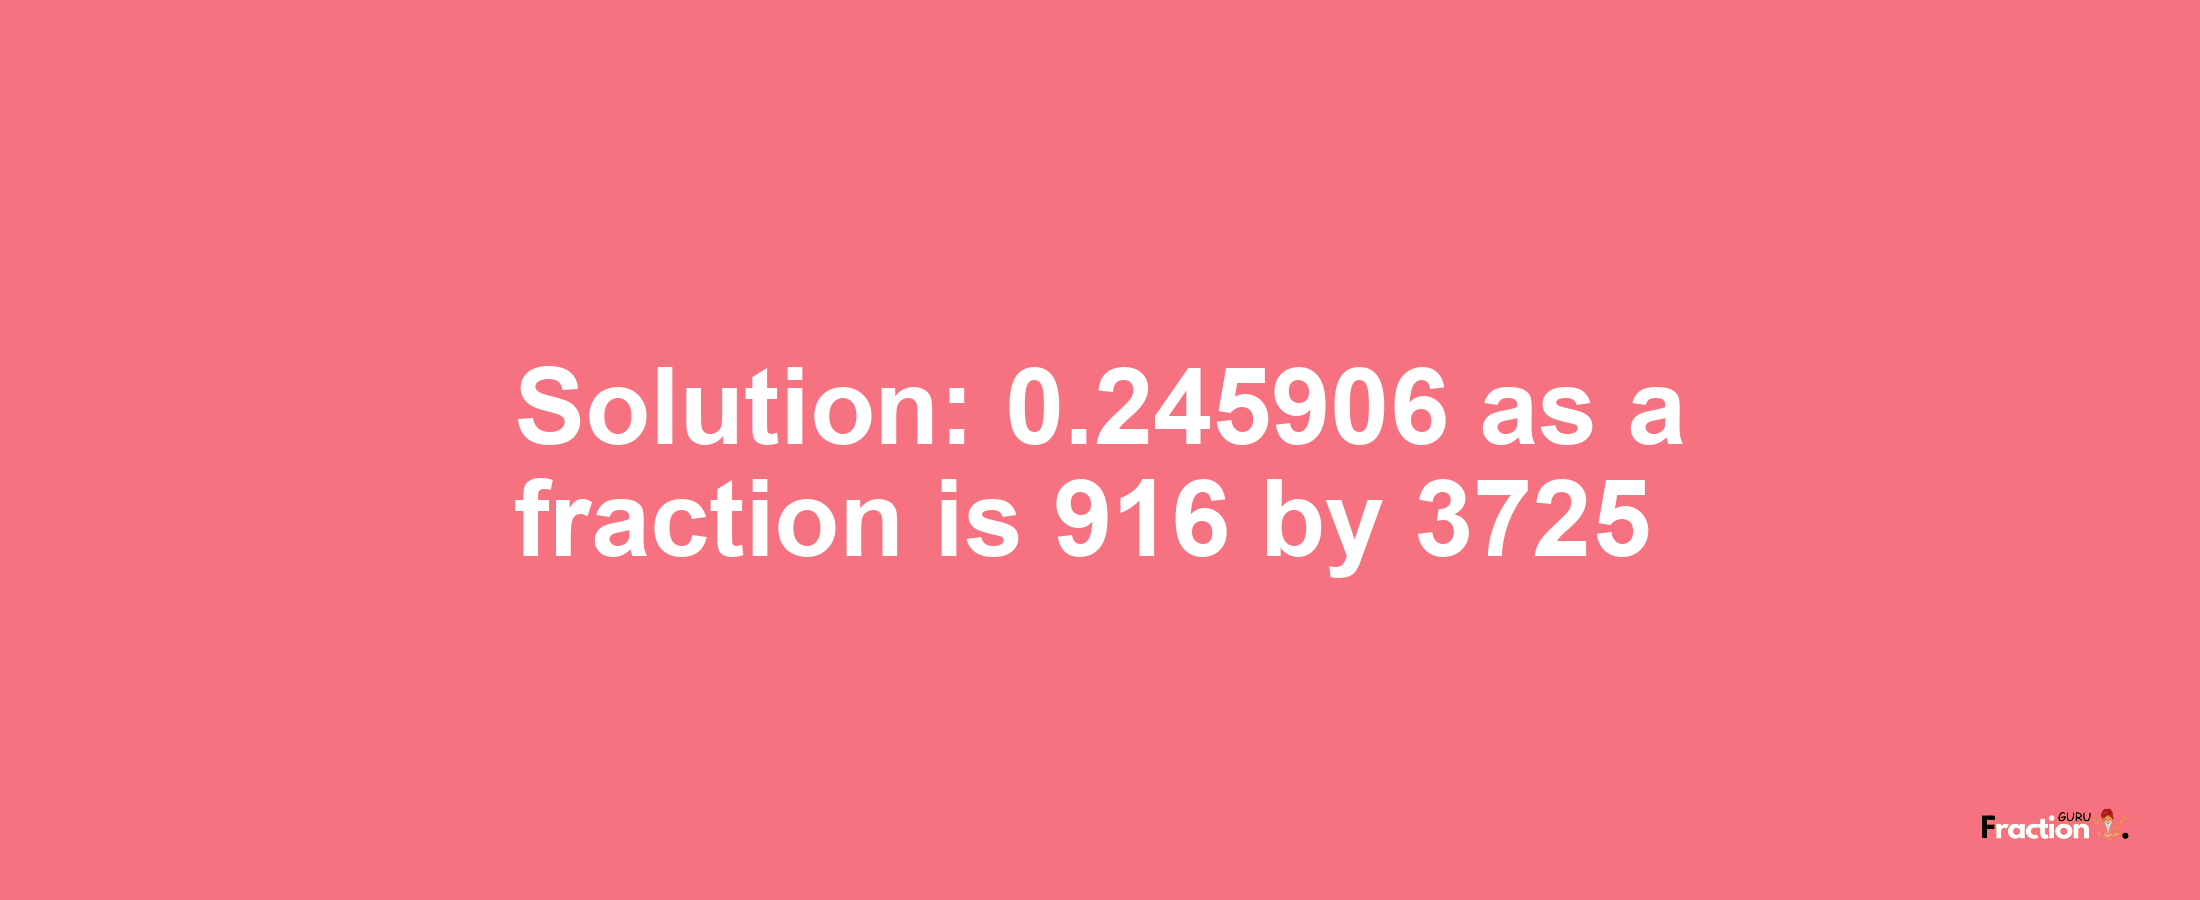 Solution:0.245906 as a fraction is 916/3725